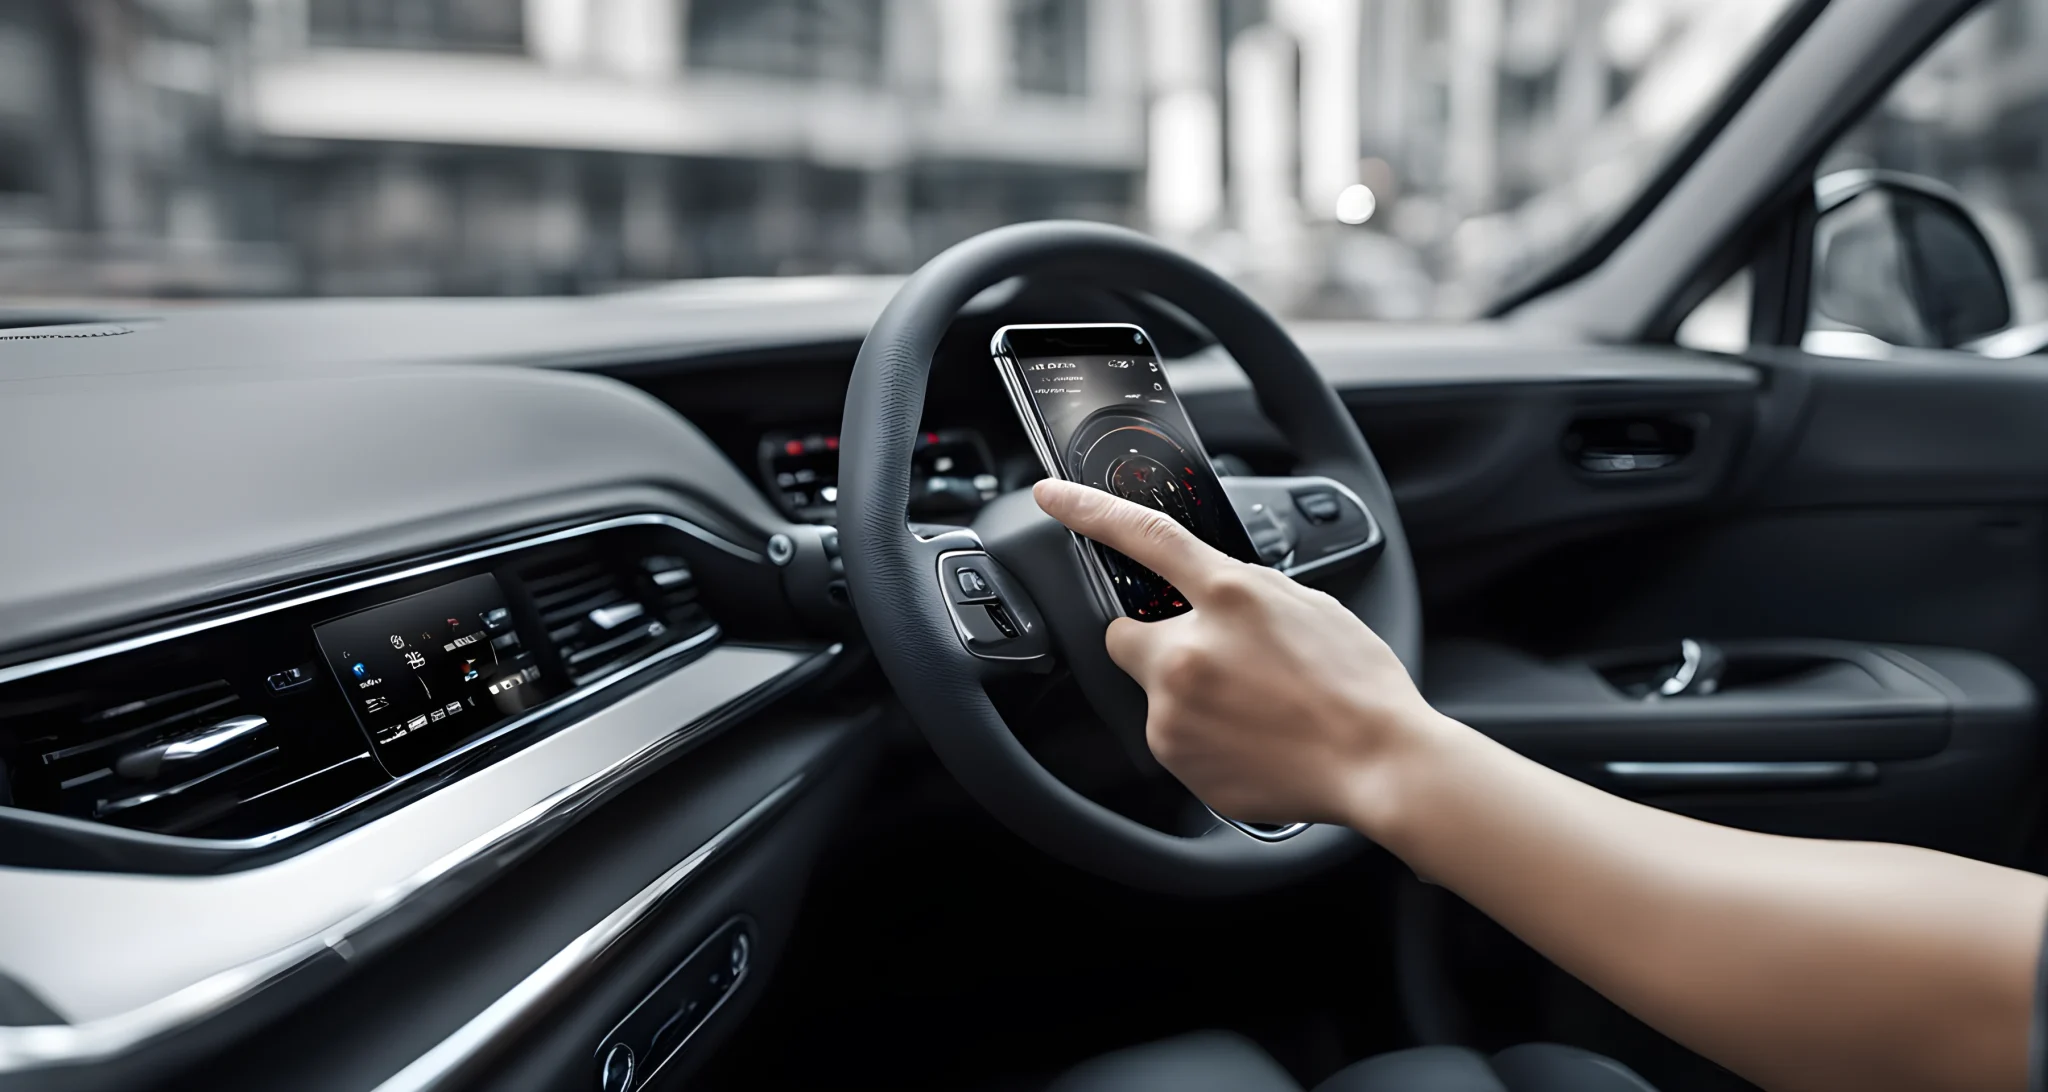 In the image, there is a smartphone integrated with a vehicle's dashboard.